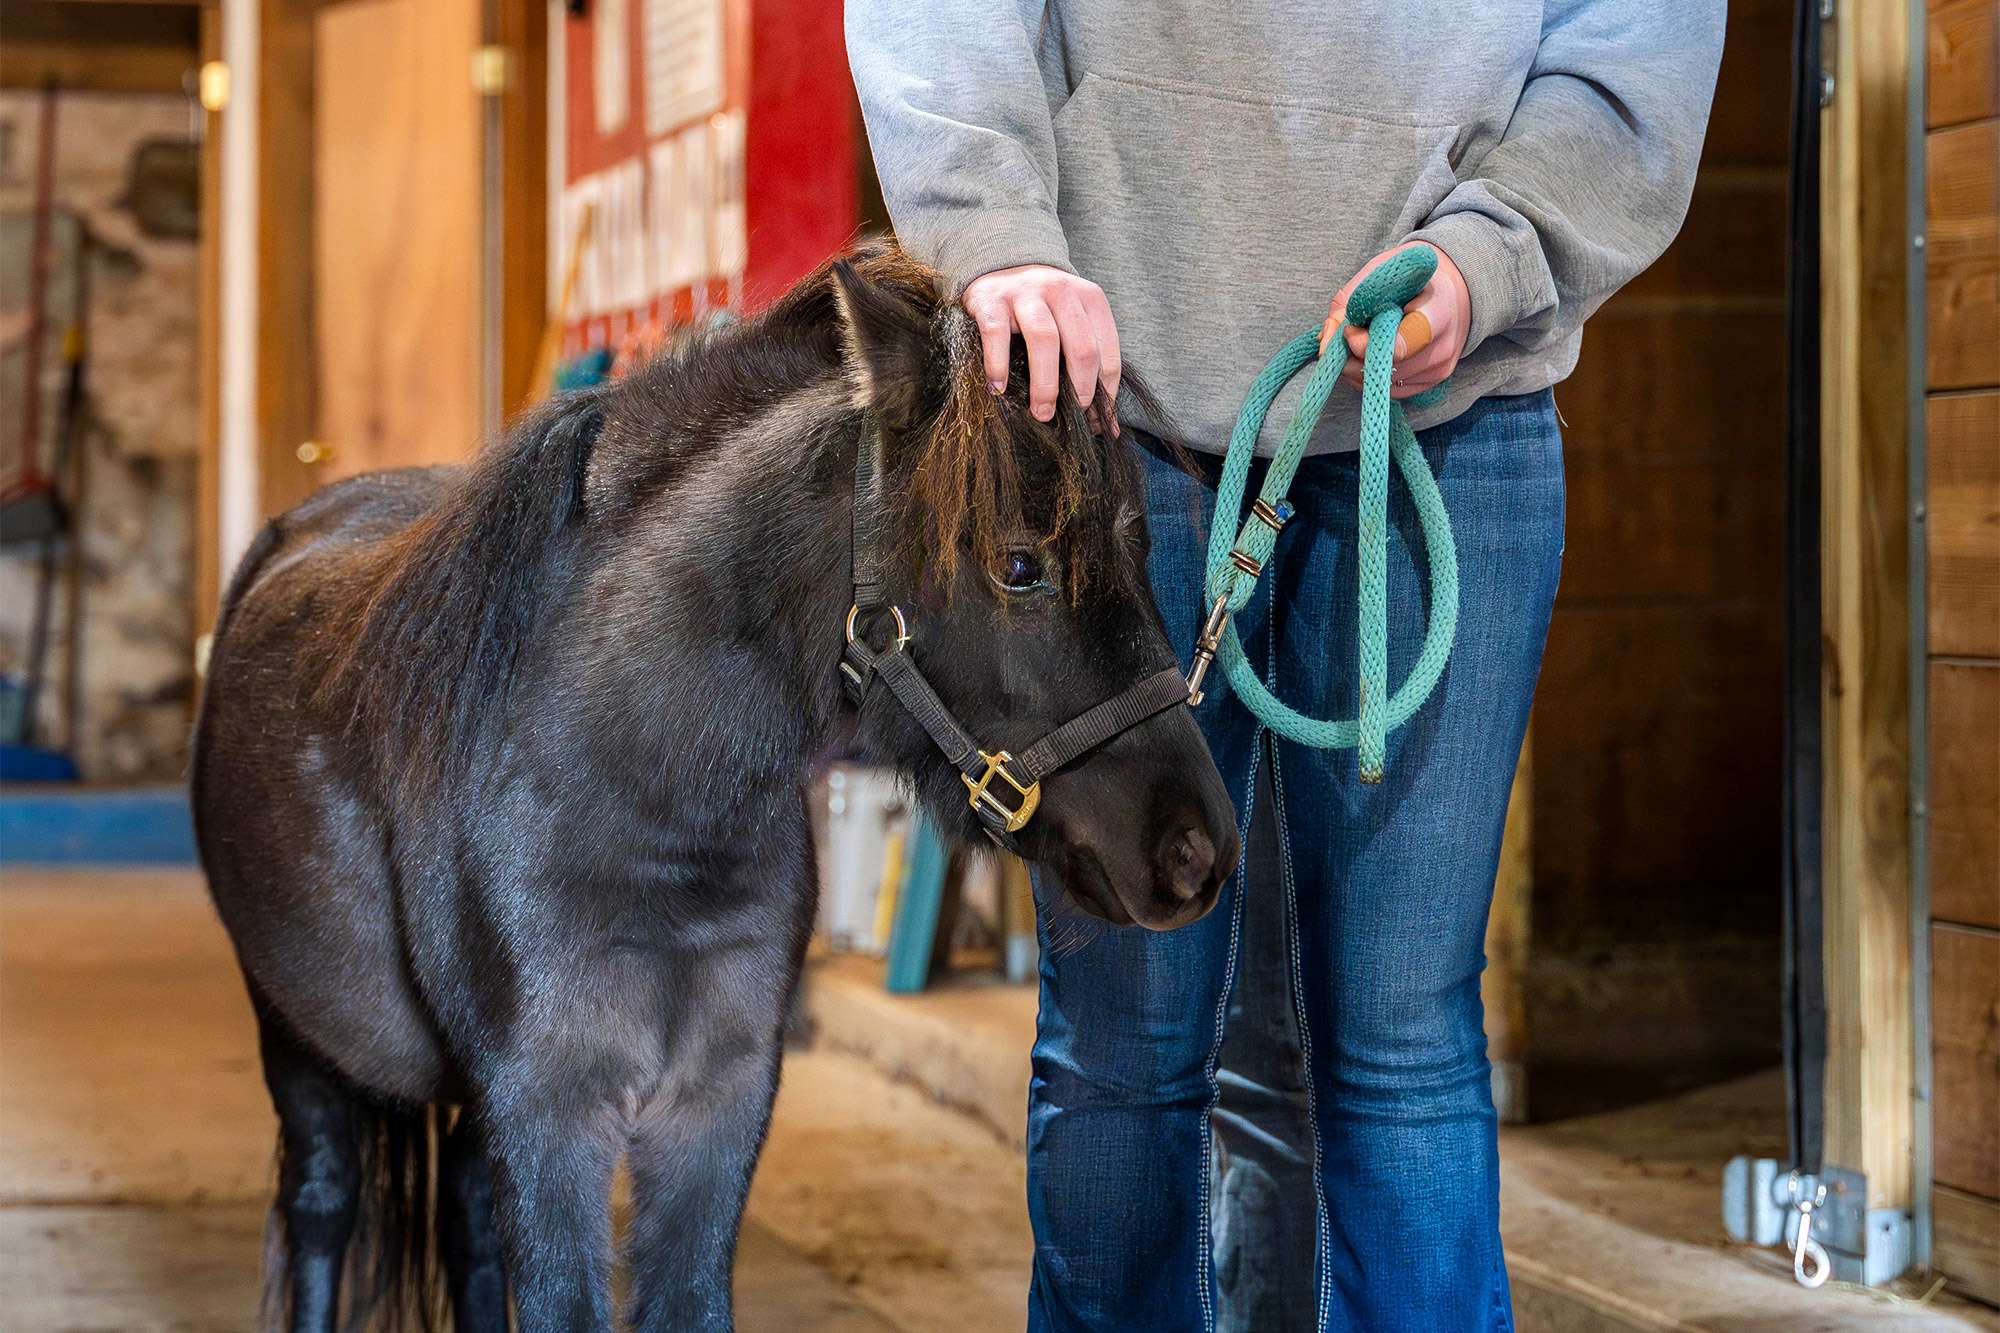 A Veterinary Technician is walking next to a black horse with her hand on the horse's head.